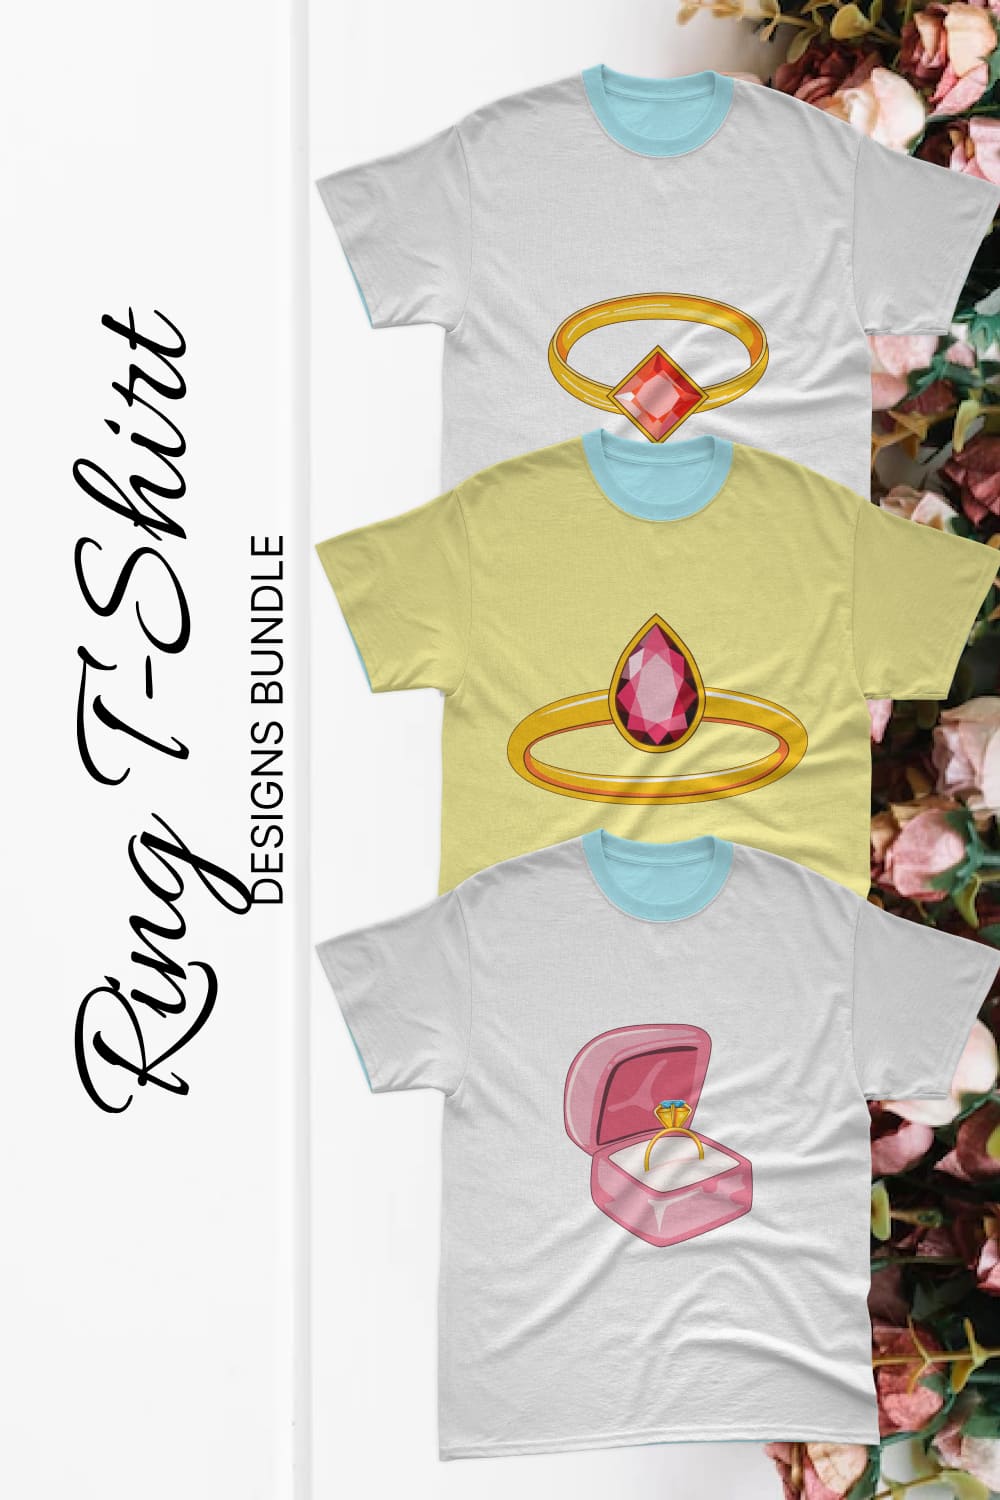 A pack of t-shirt images with adorable wedding ring prints.